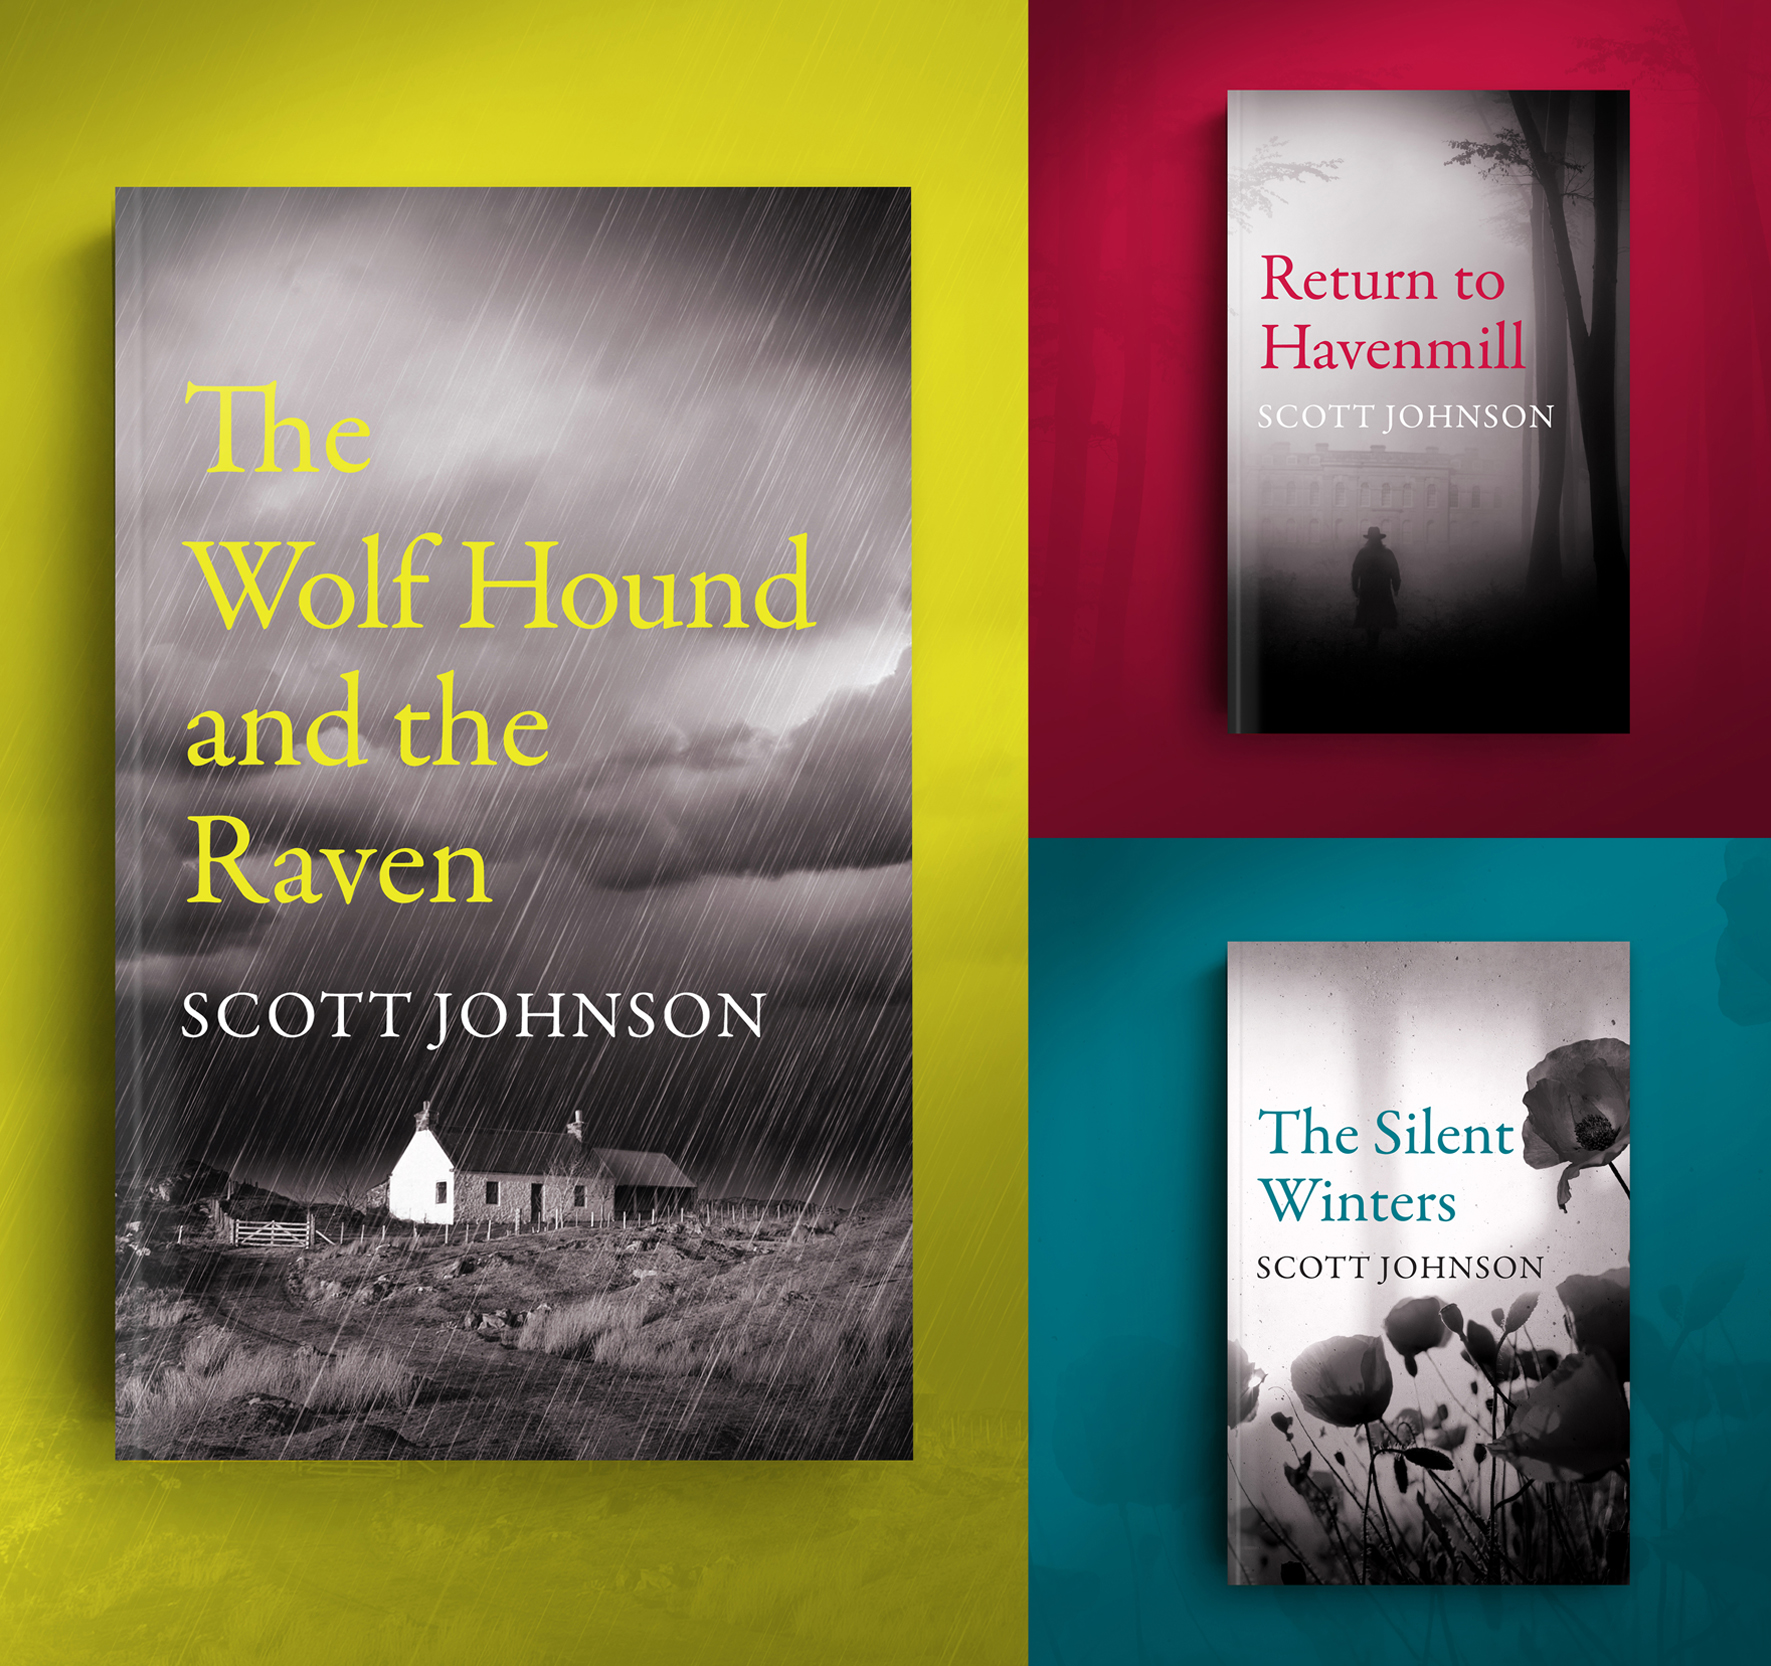 The Wolf Hound and the Raven paperback trilogy